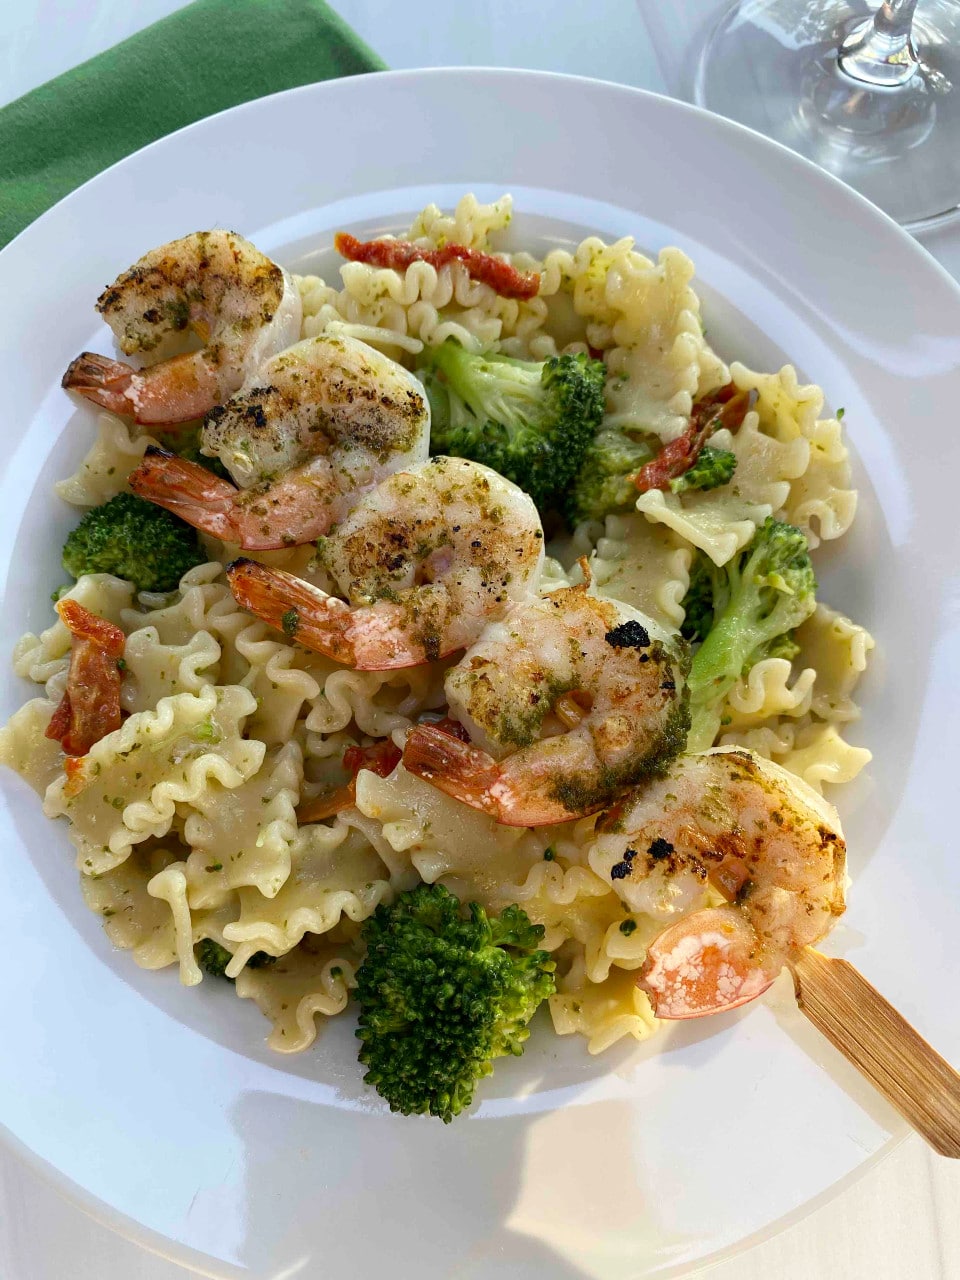 Pesto pasta salad in a white bowl with a skewer of grilled shrimp placed on top